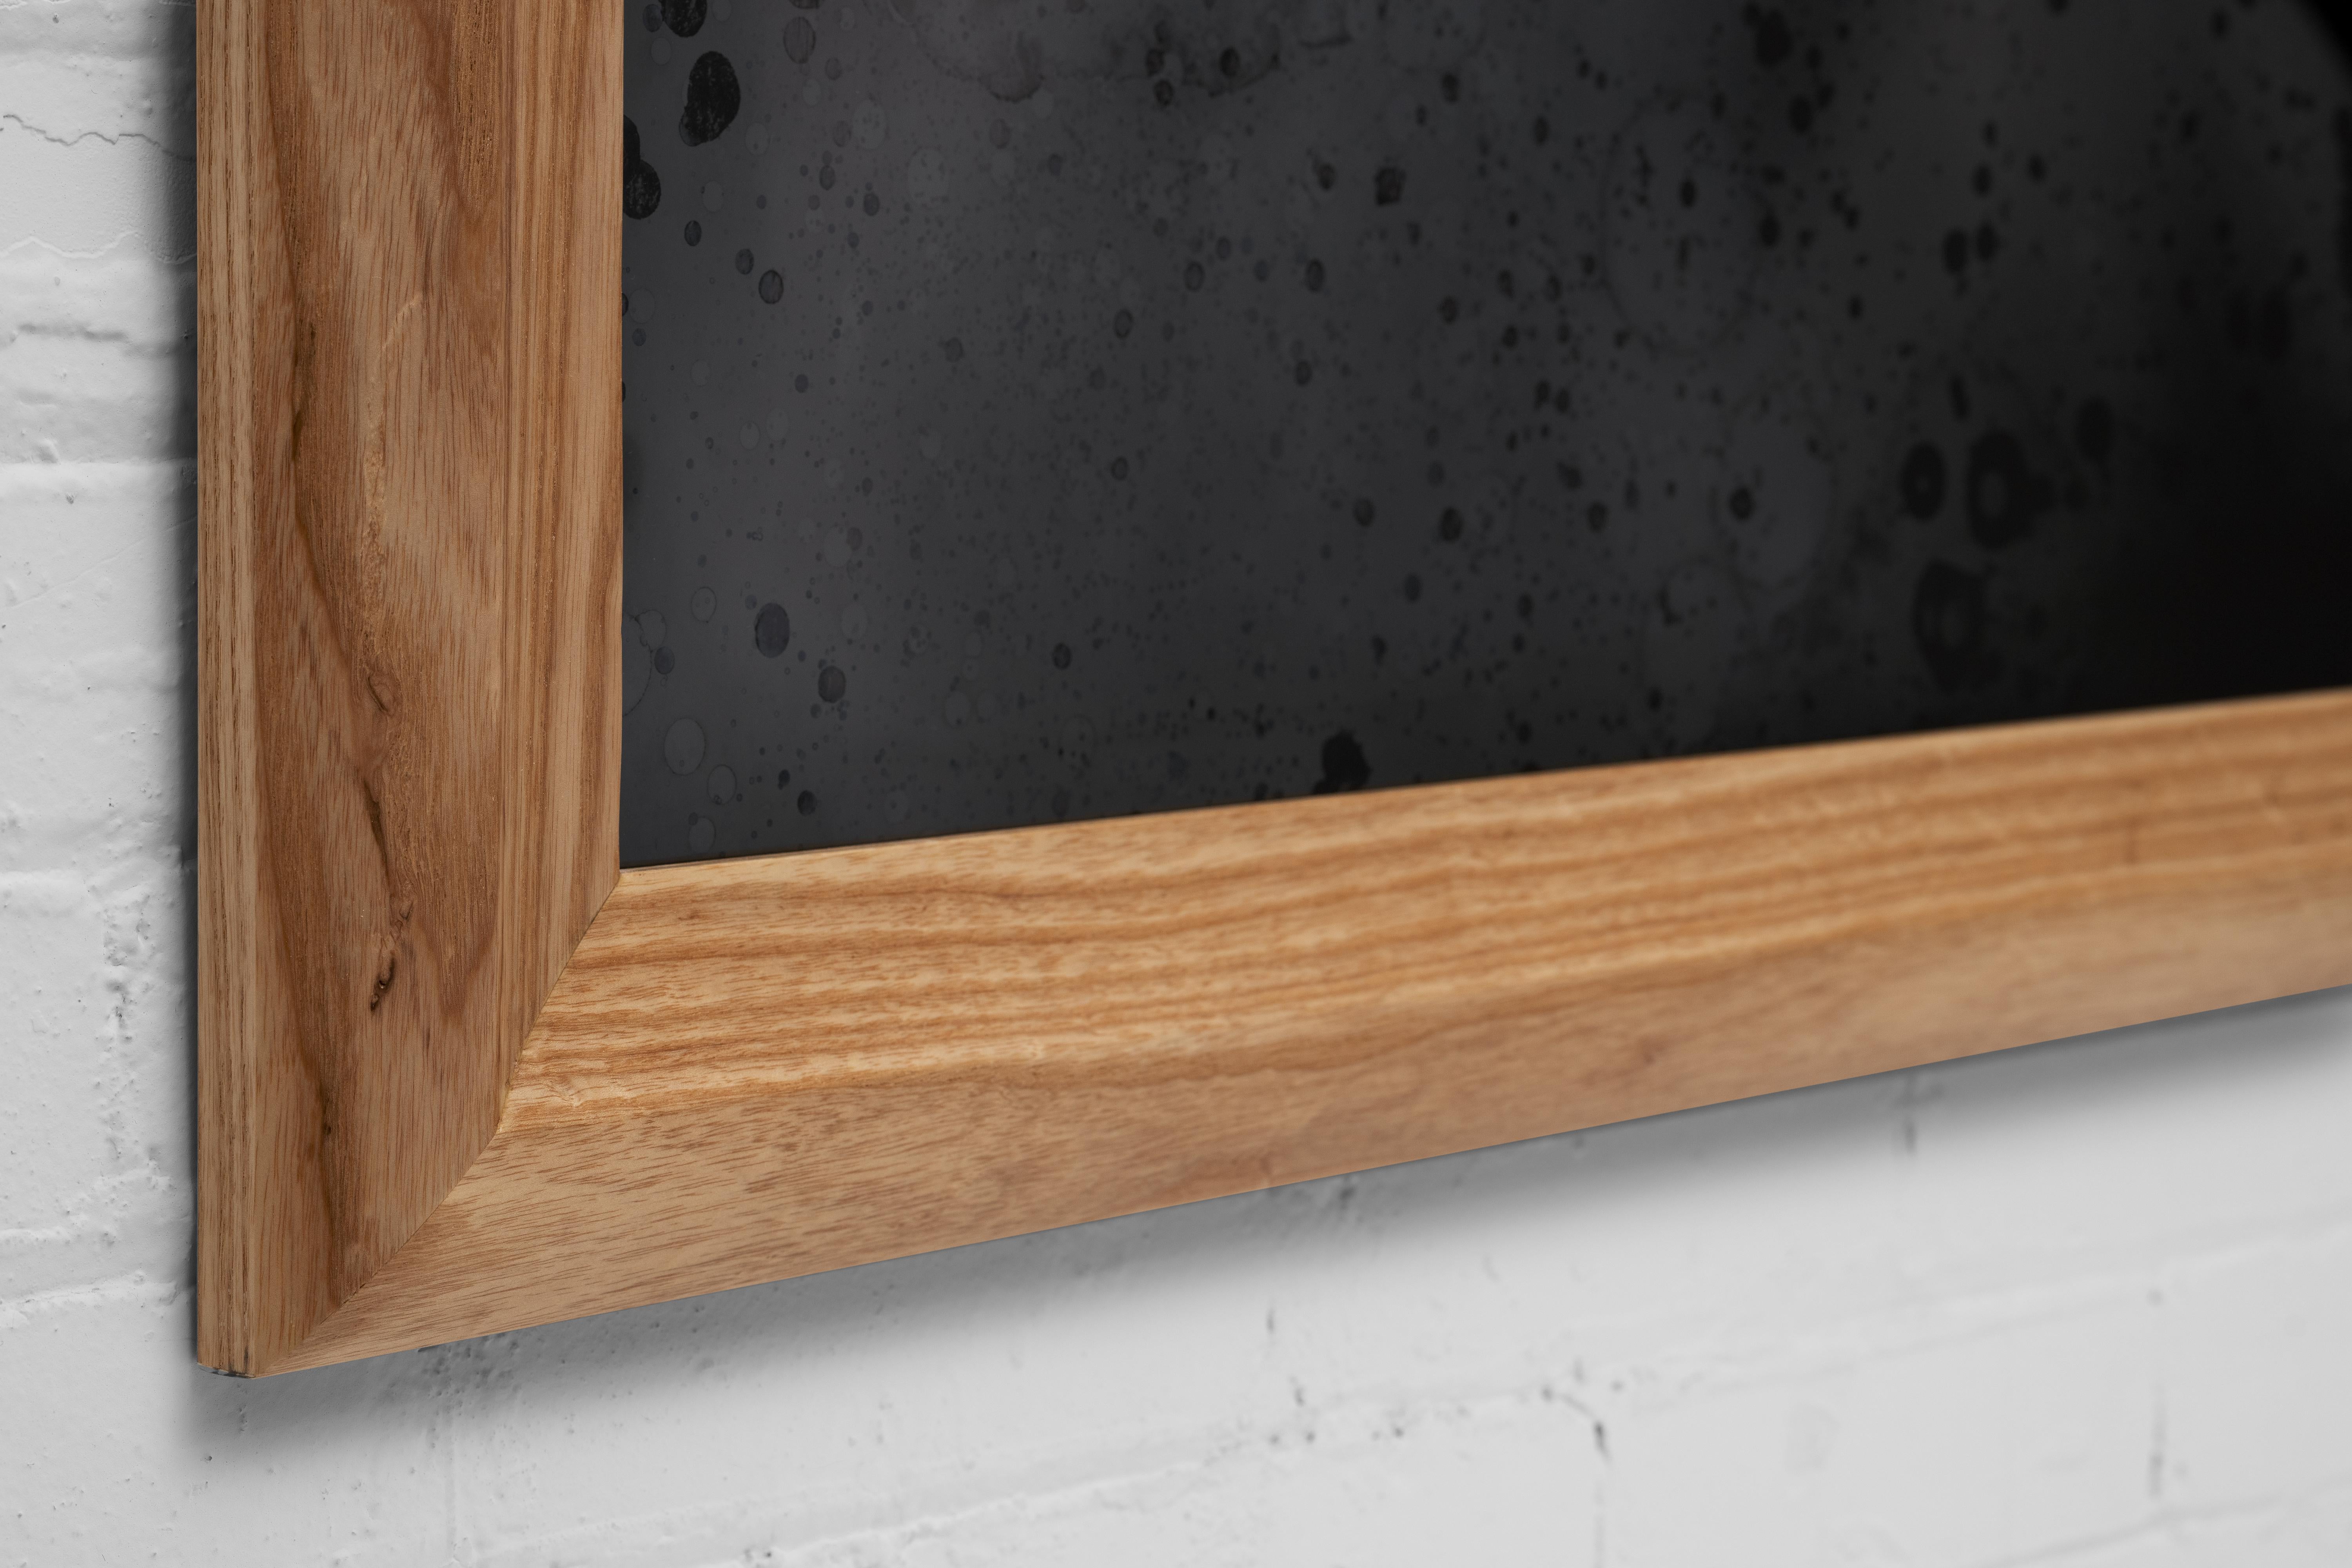 Soft rolling shapes on this solid wood frame draw the eye into a Scathain mirror.

All of our mirrors are custom-made to order and one of a kind. Our unique mirroring process produces wildly fantastic mirrors, rich with character and depth. This